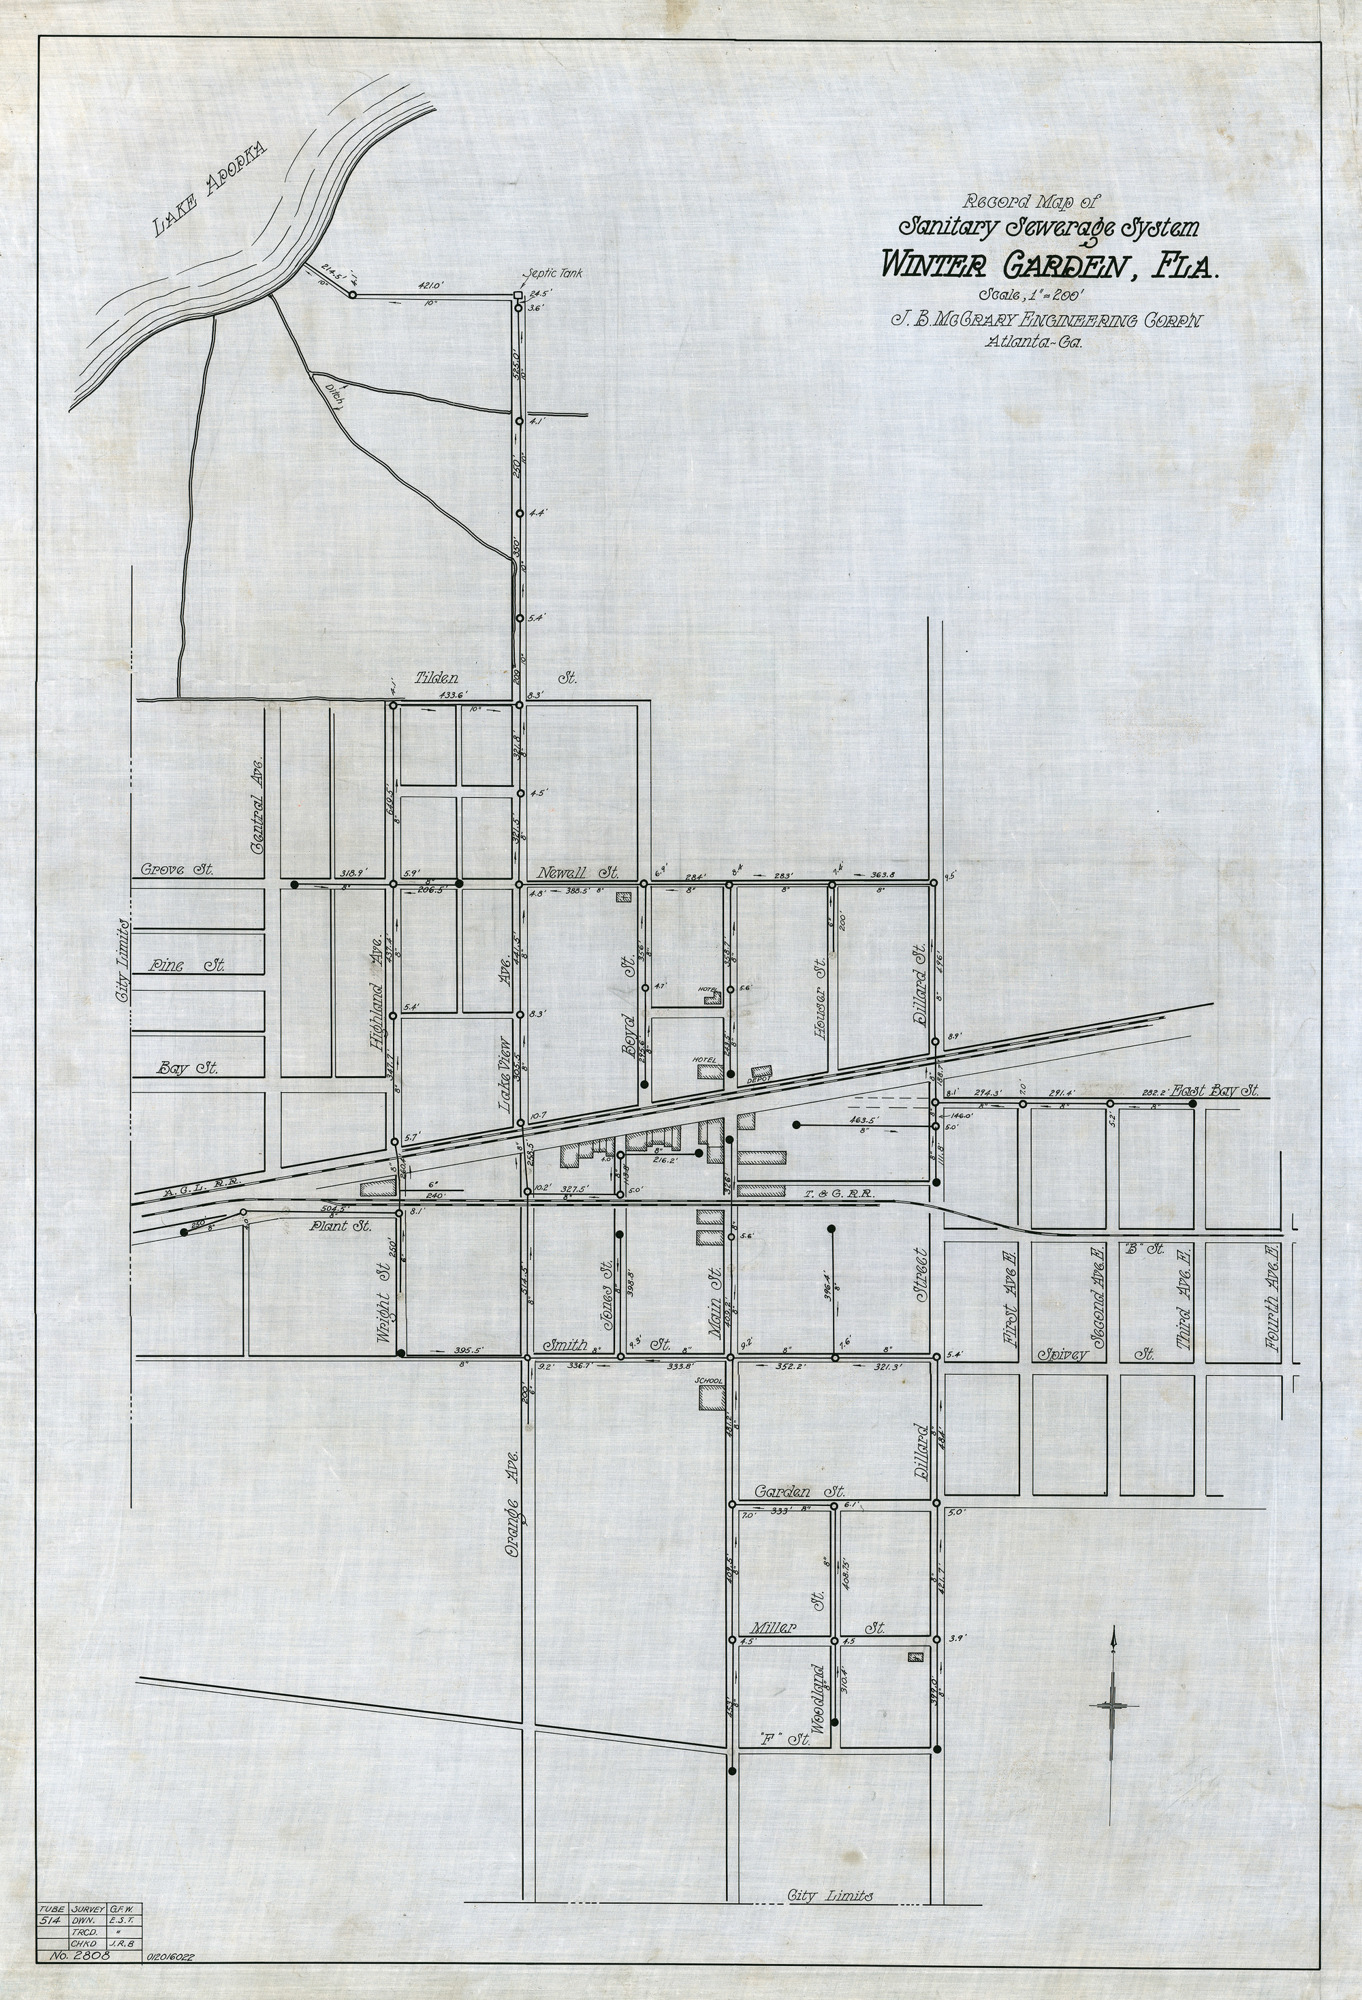 All of Winter Garden’s sewer lines were plotted on this sanitary sewerage system map from 1923.